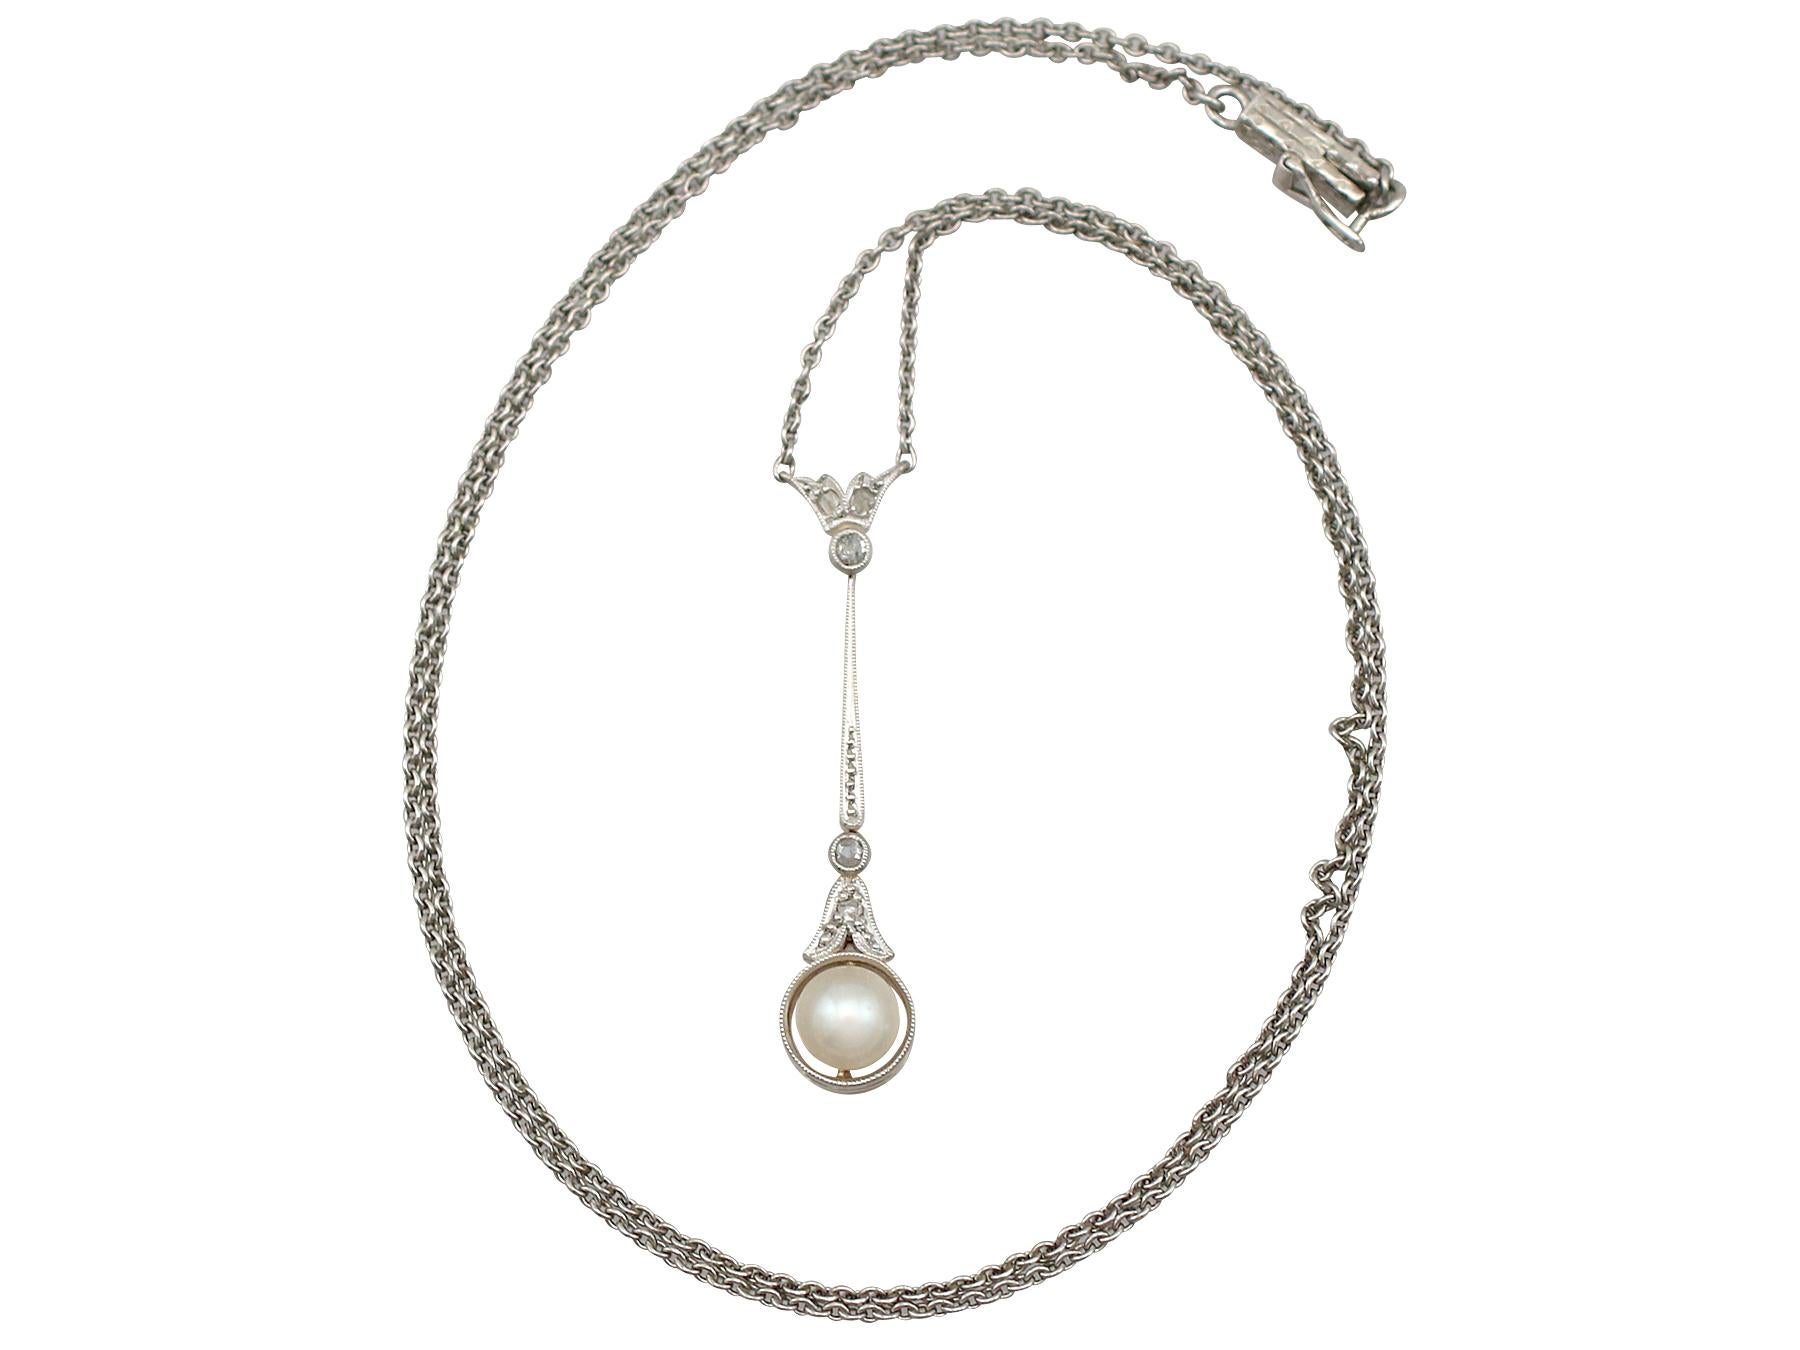 An impressive antique seed pearl and 0.05 carat diamond, 14 karat yellow gold and silver set necklace; part of our diverse antique jewelry collections.

This fine and impressive pearl necklace with diamonds has been crafted in 14k yellow gold with a